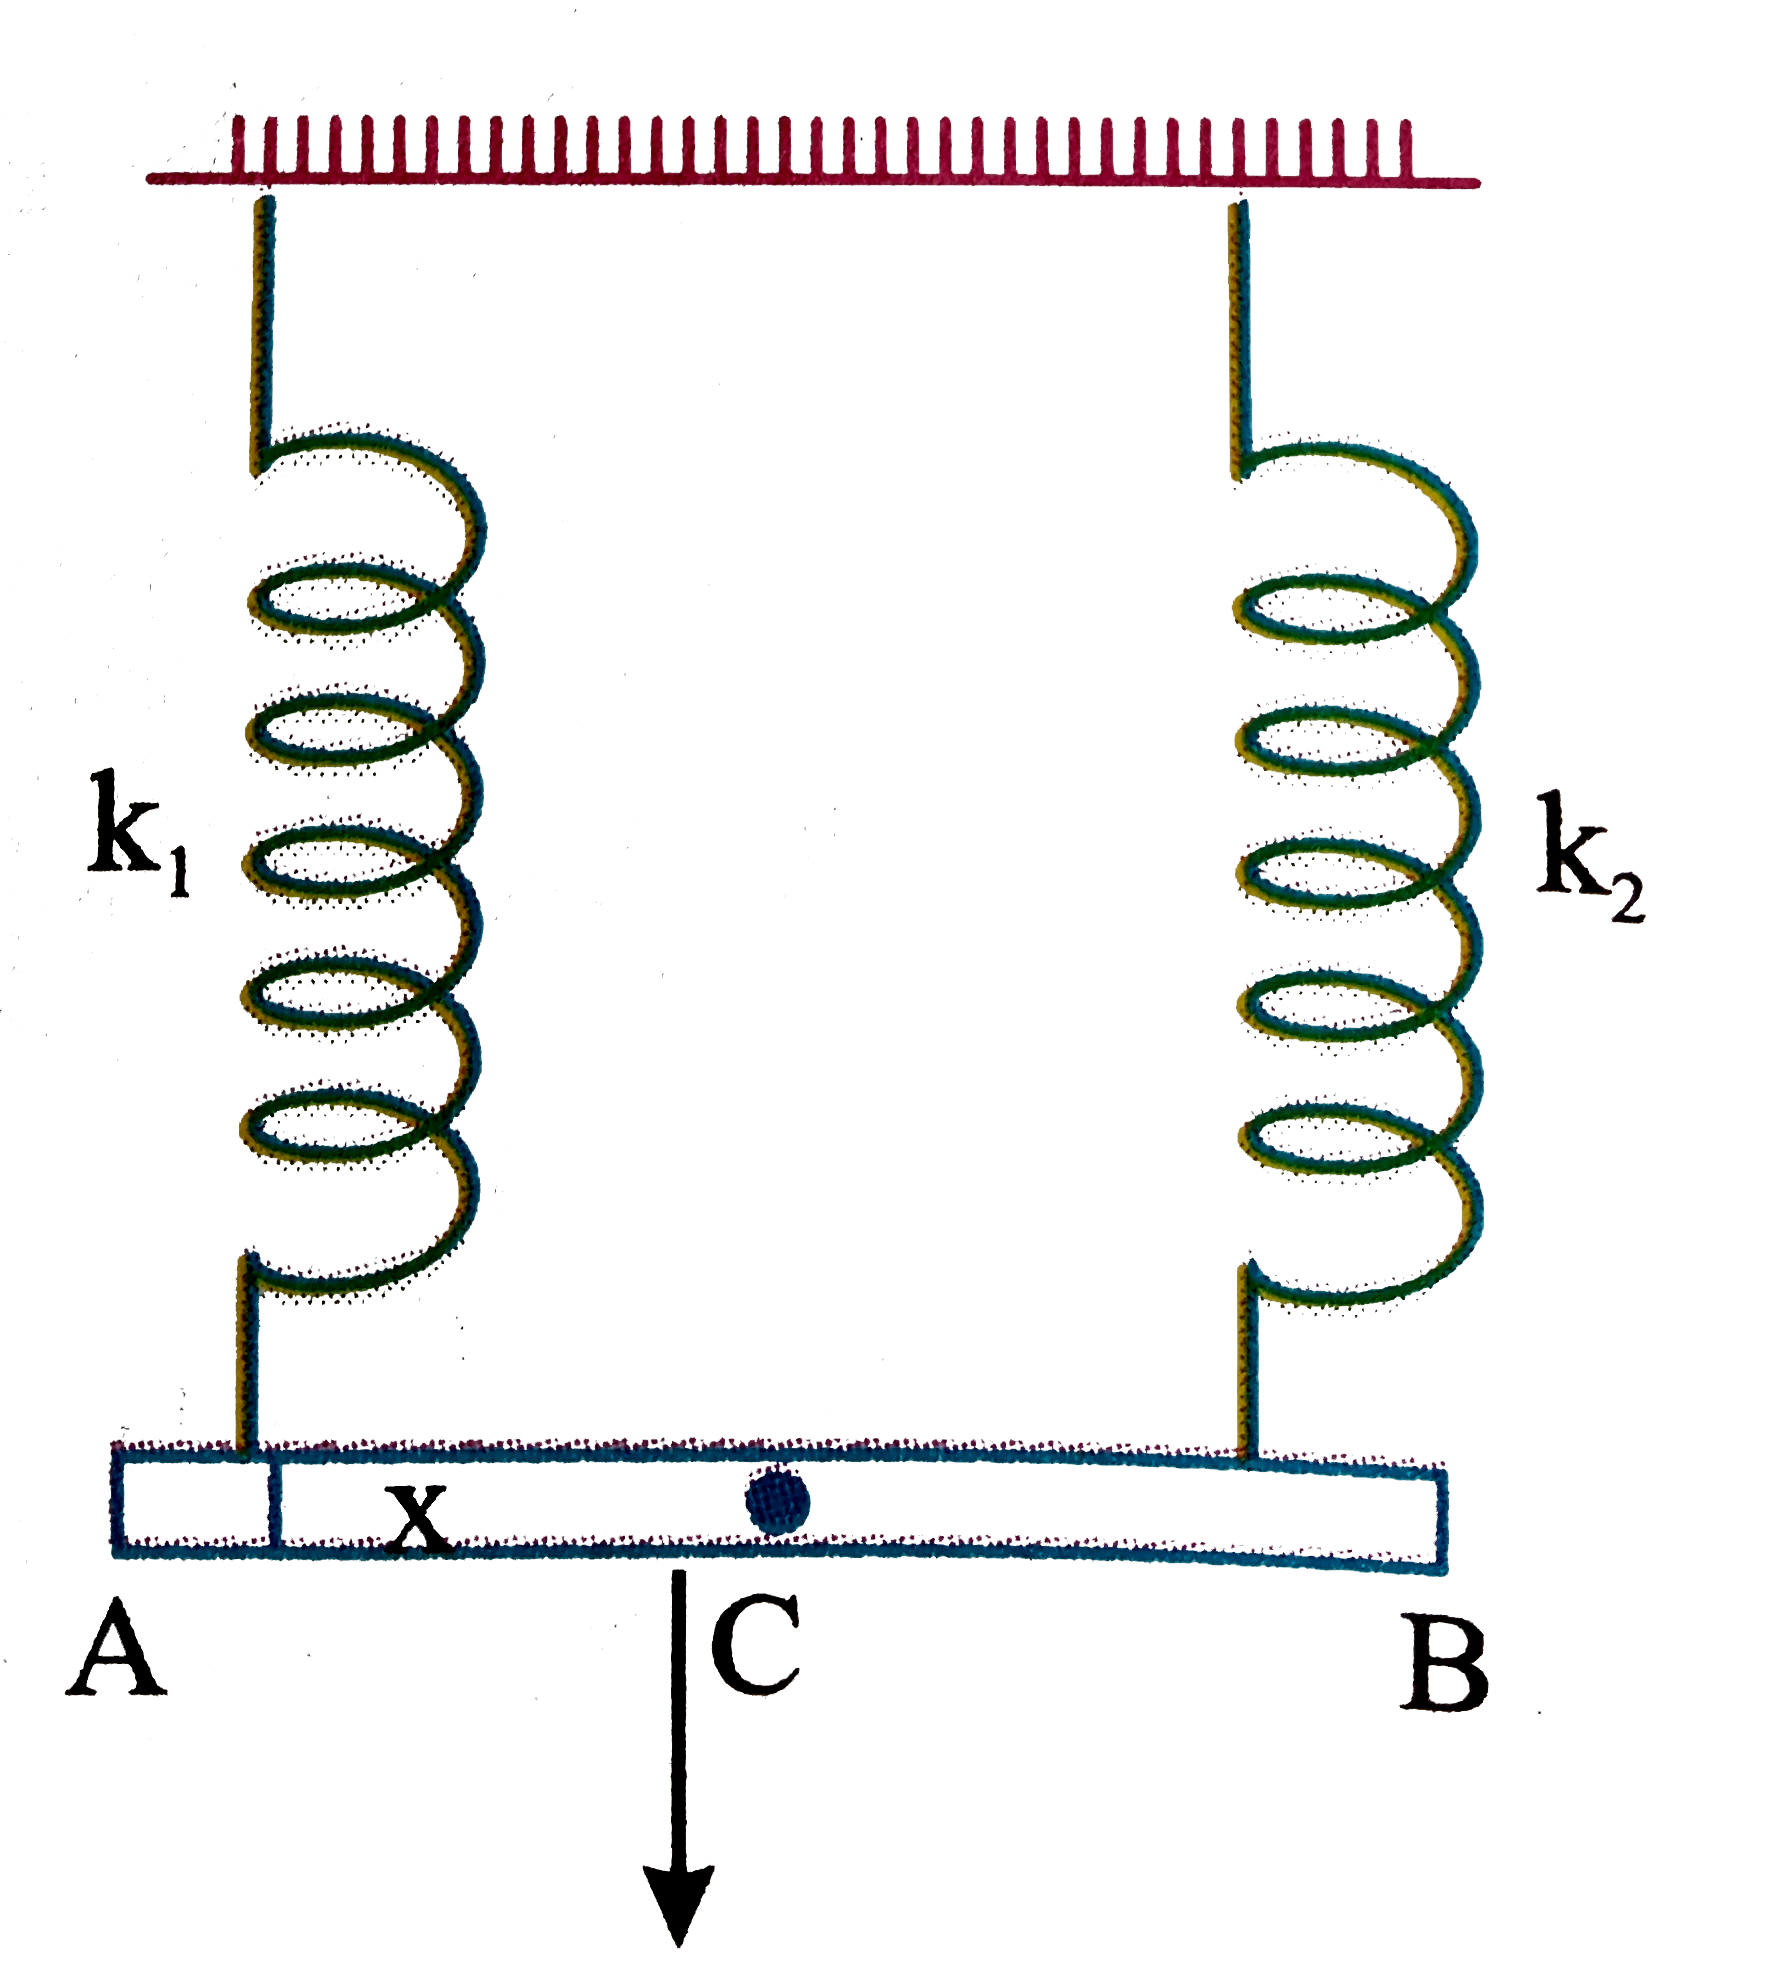 Two light vertical springs with equal natural length and spring constants k(1) and k(2) are separated by a distance l. Their upper ends are rigidly connected and the lower ends are connected to  A and B of a light horizontal rod AB. A vertically downwards force F is applied at point C on the rod. AB will remain horizontal in equilibrium if the distance AC is